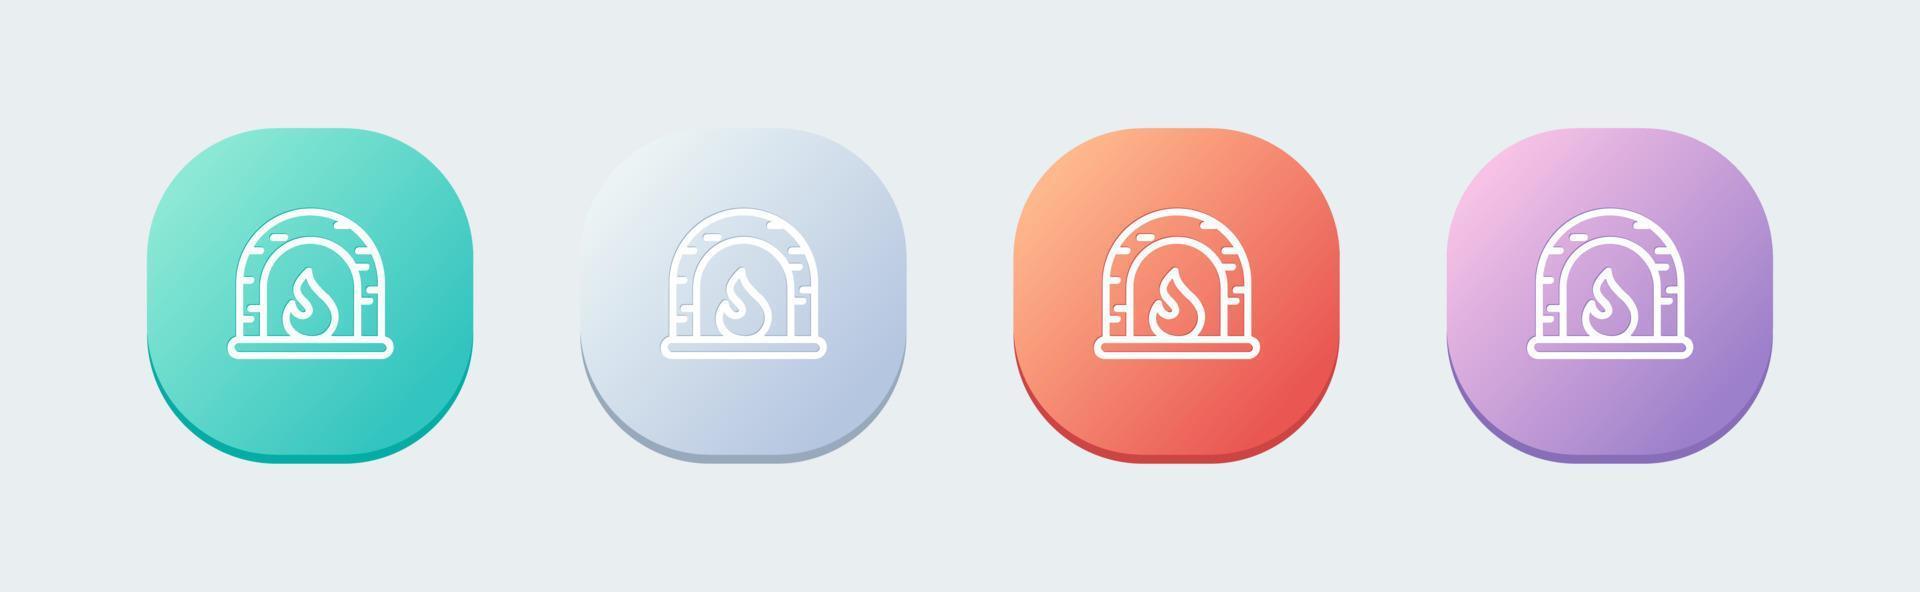 Fireplace line icon in flat design style. Hygge signs vector illustration.